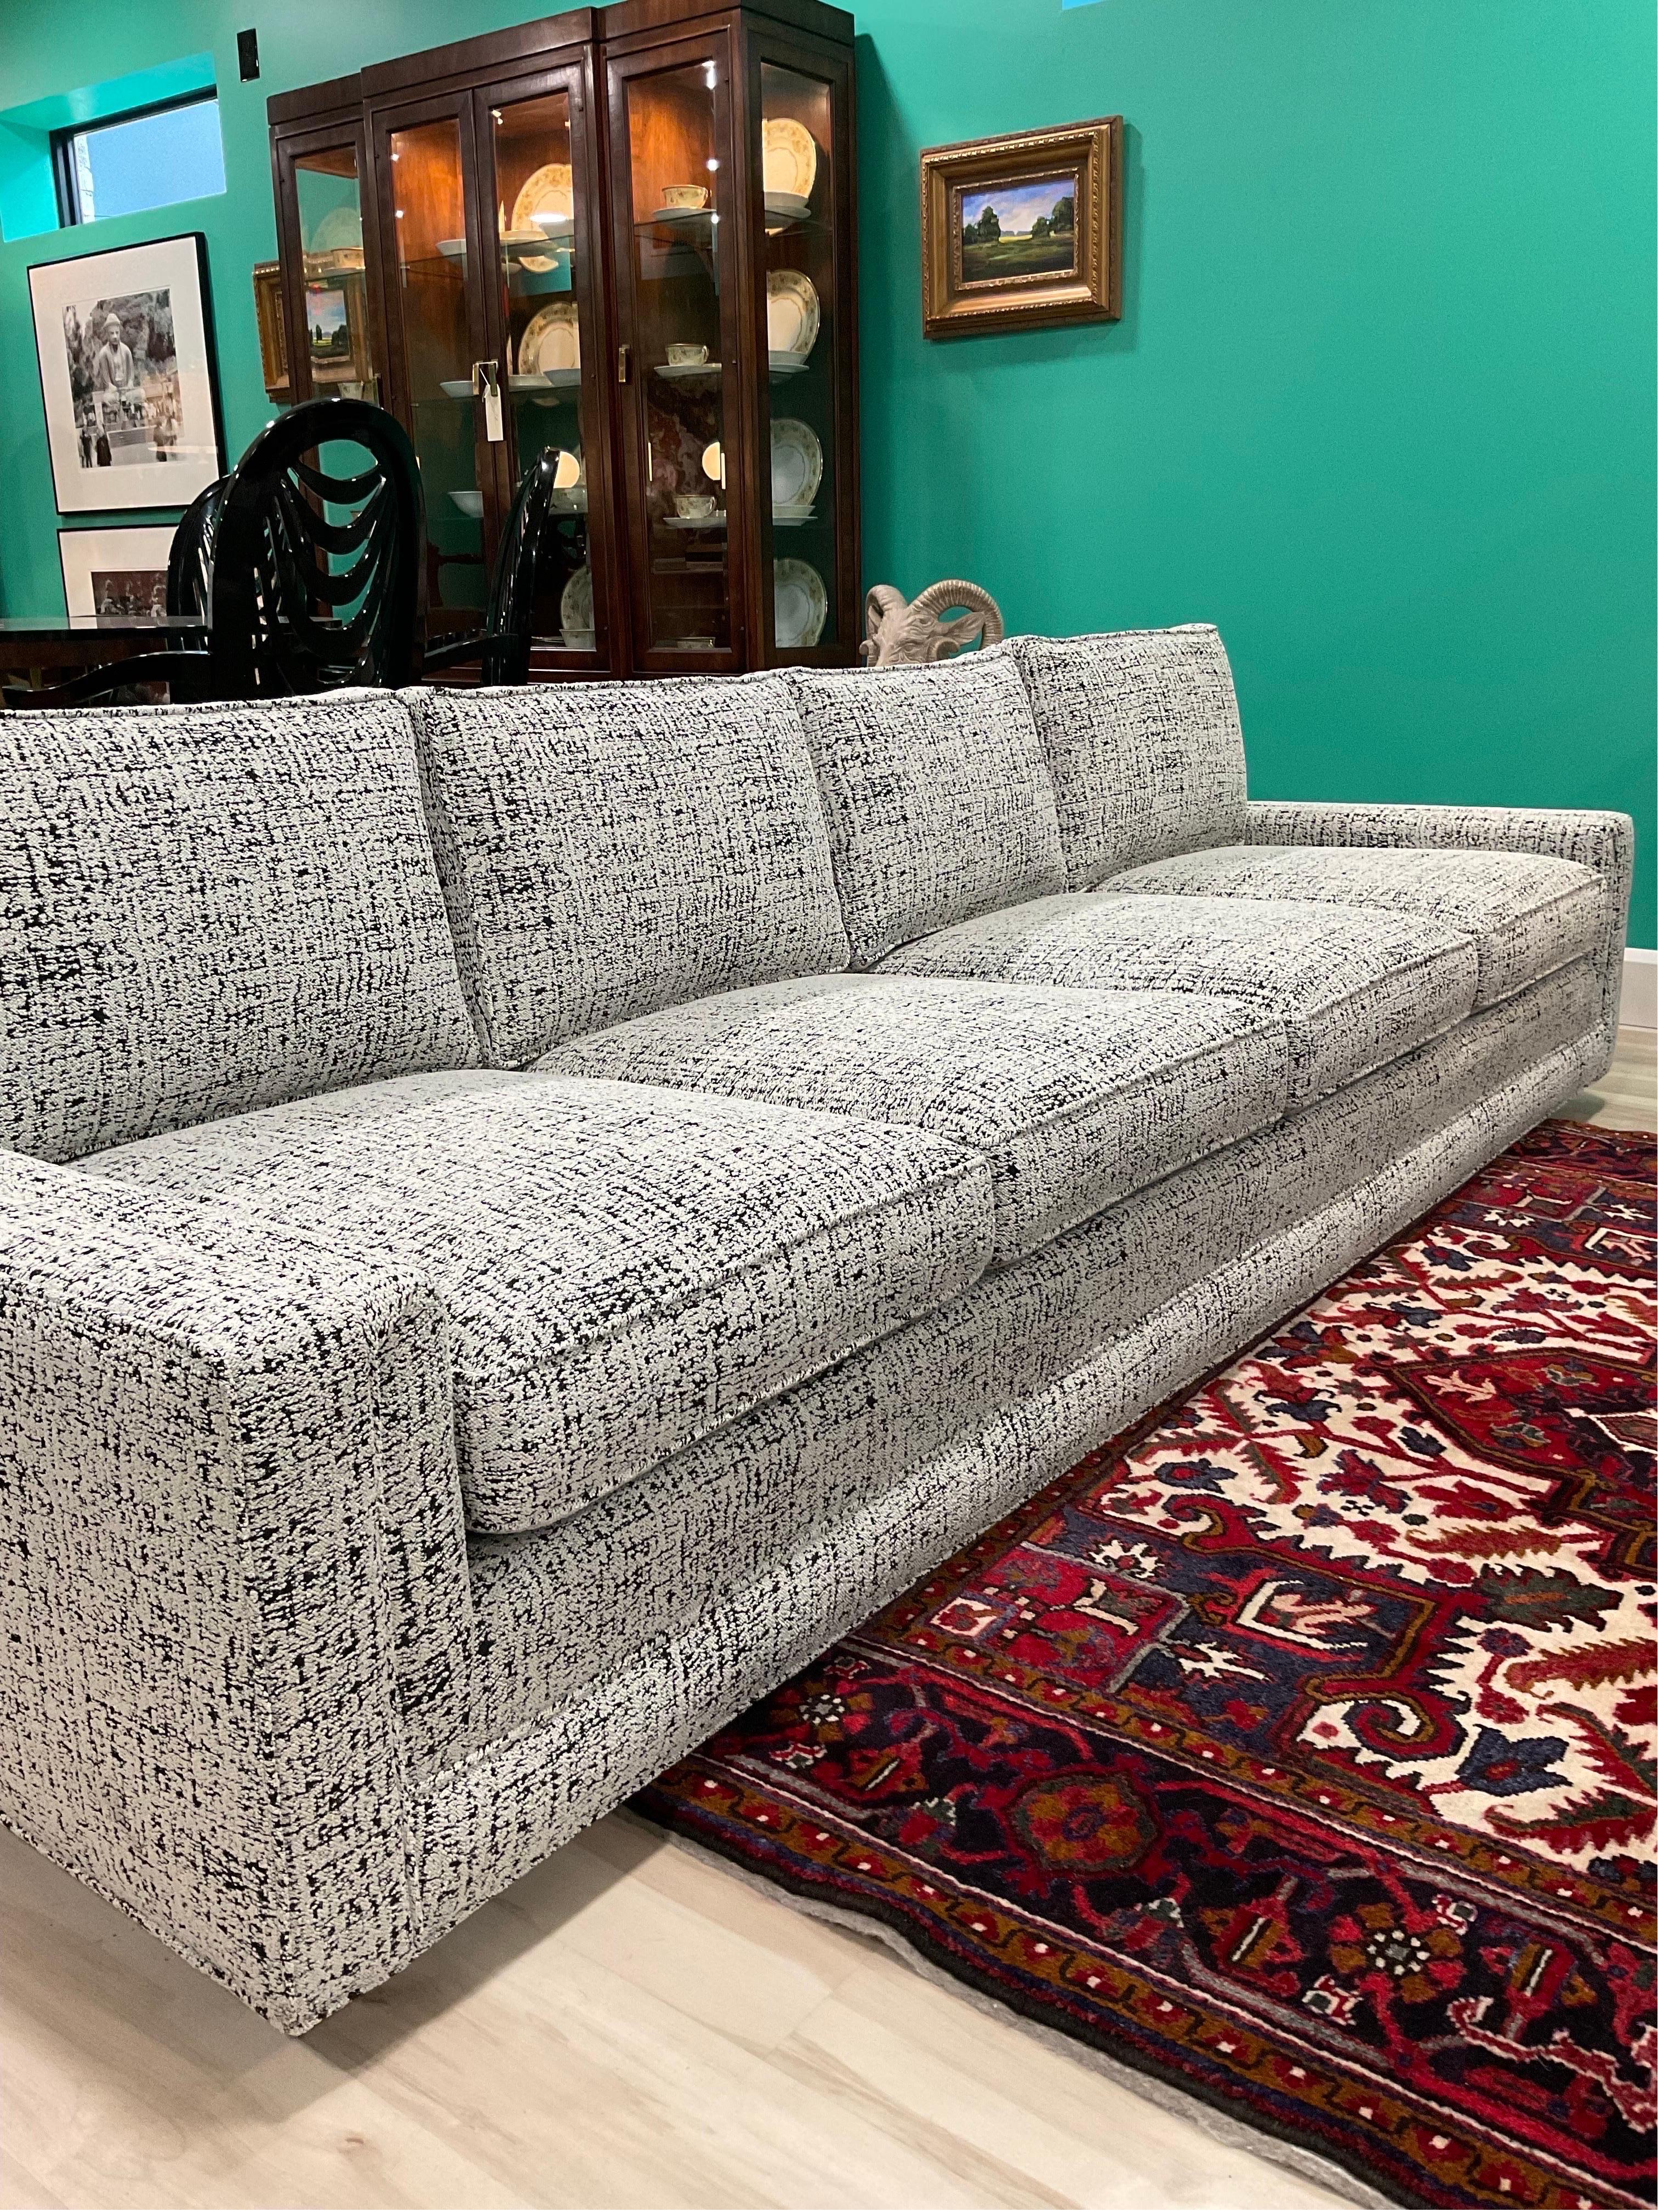 This is one very cool cat. Epic renovation just back from the Upholstery Masters and wrapped in the most sophisticated Boucle you’ve ever seen, from Kravet. White and dark charcoal. It’s brilliant. Spectacular lines. Just a wonderful piece. Very